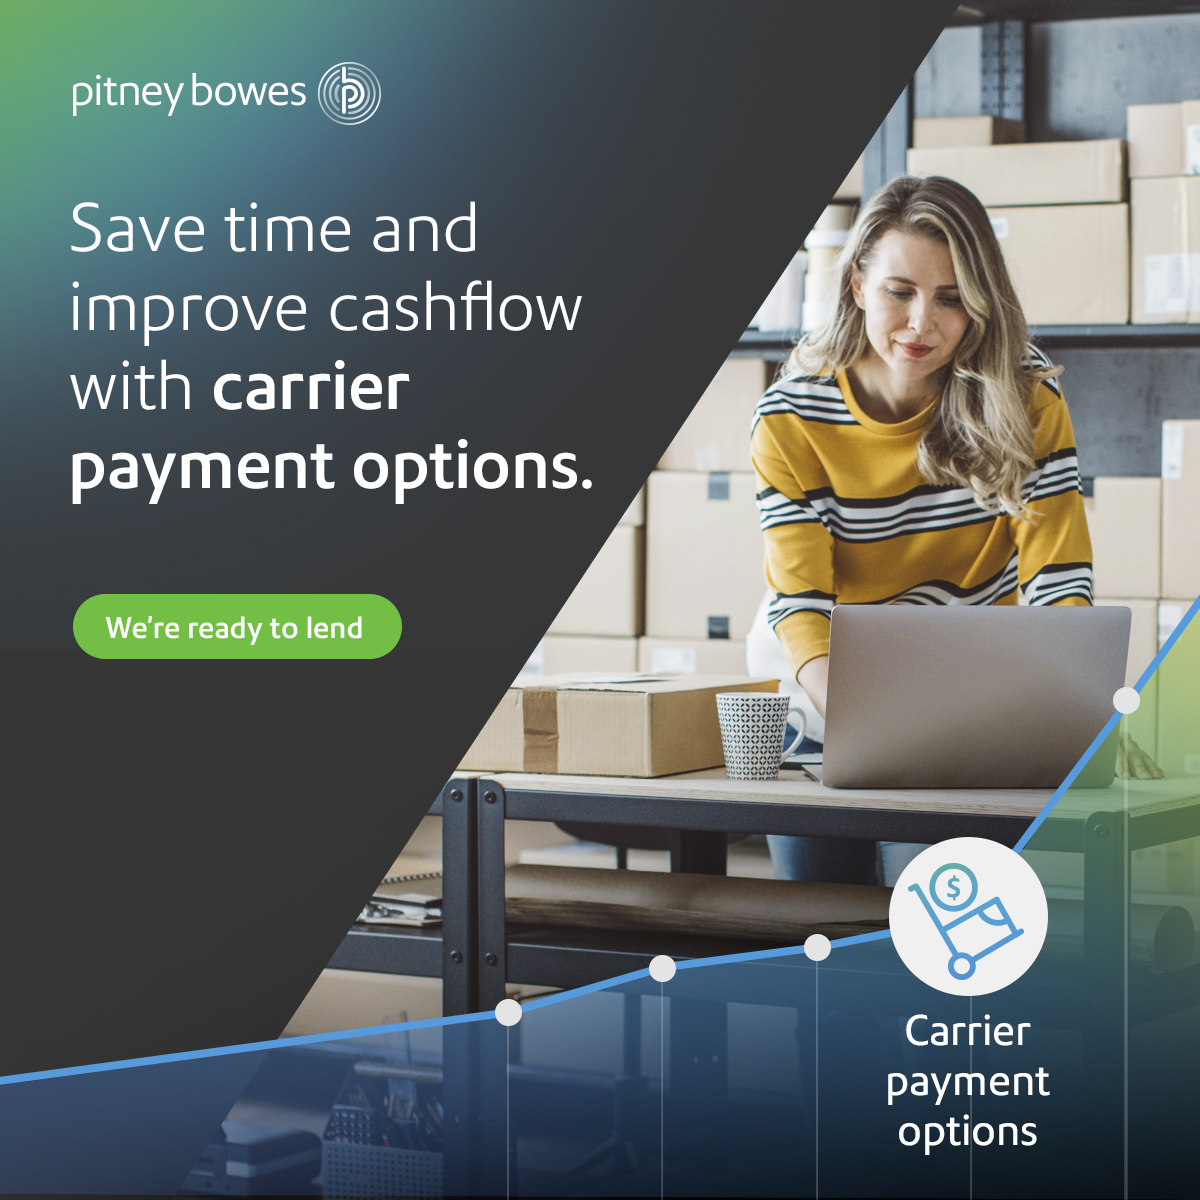 Back to Business campaign for Pitney Bowes Financial Services - social media examples - Joseph Ehlinger copywriter